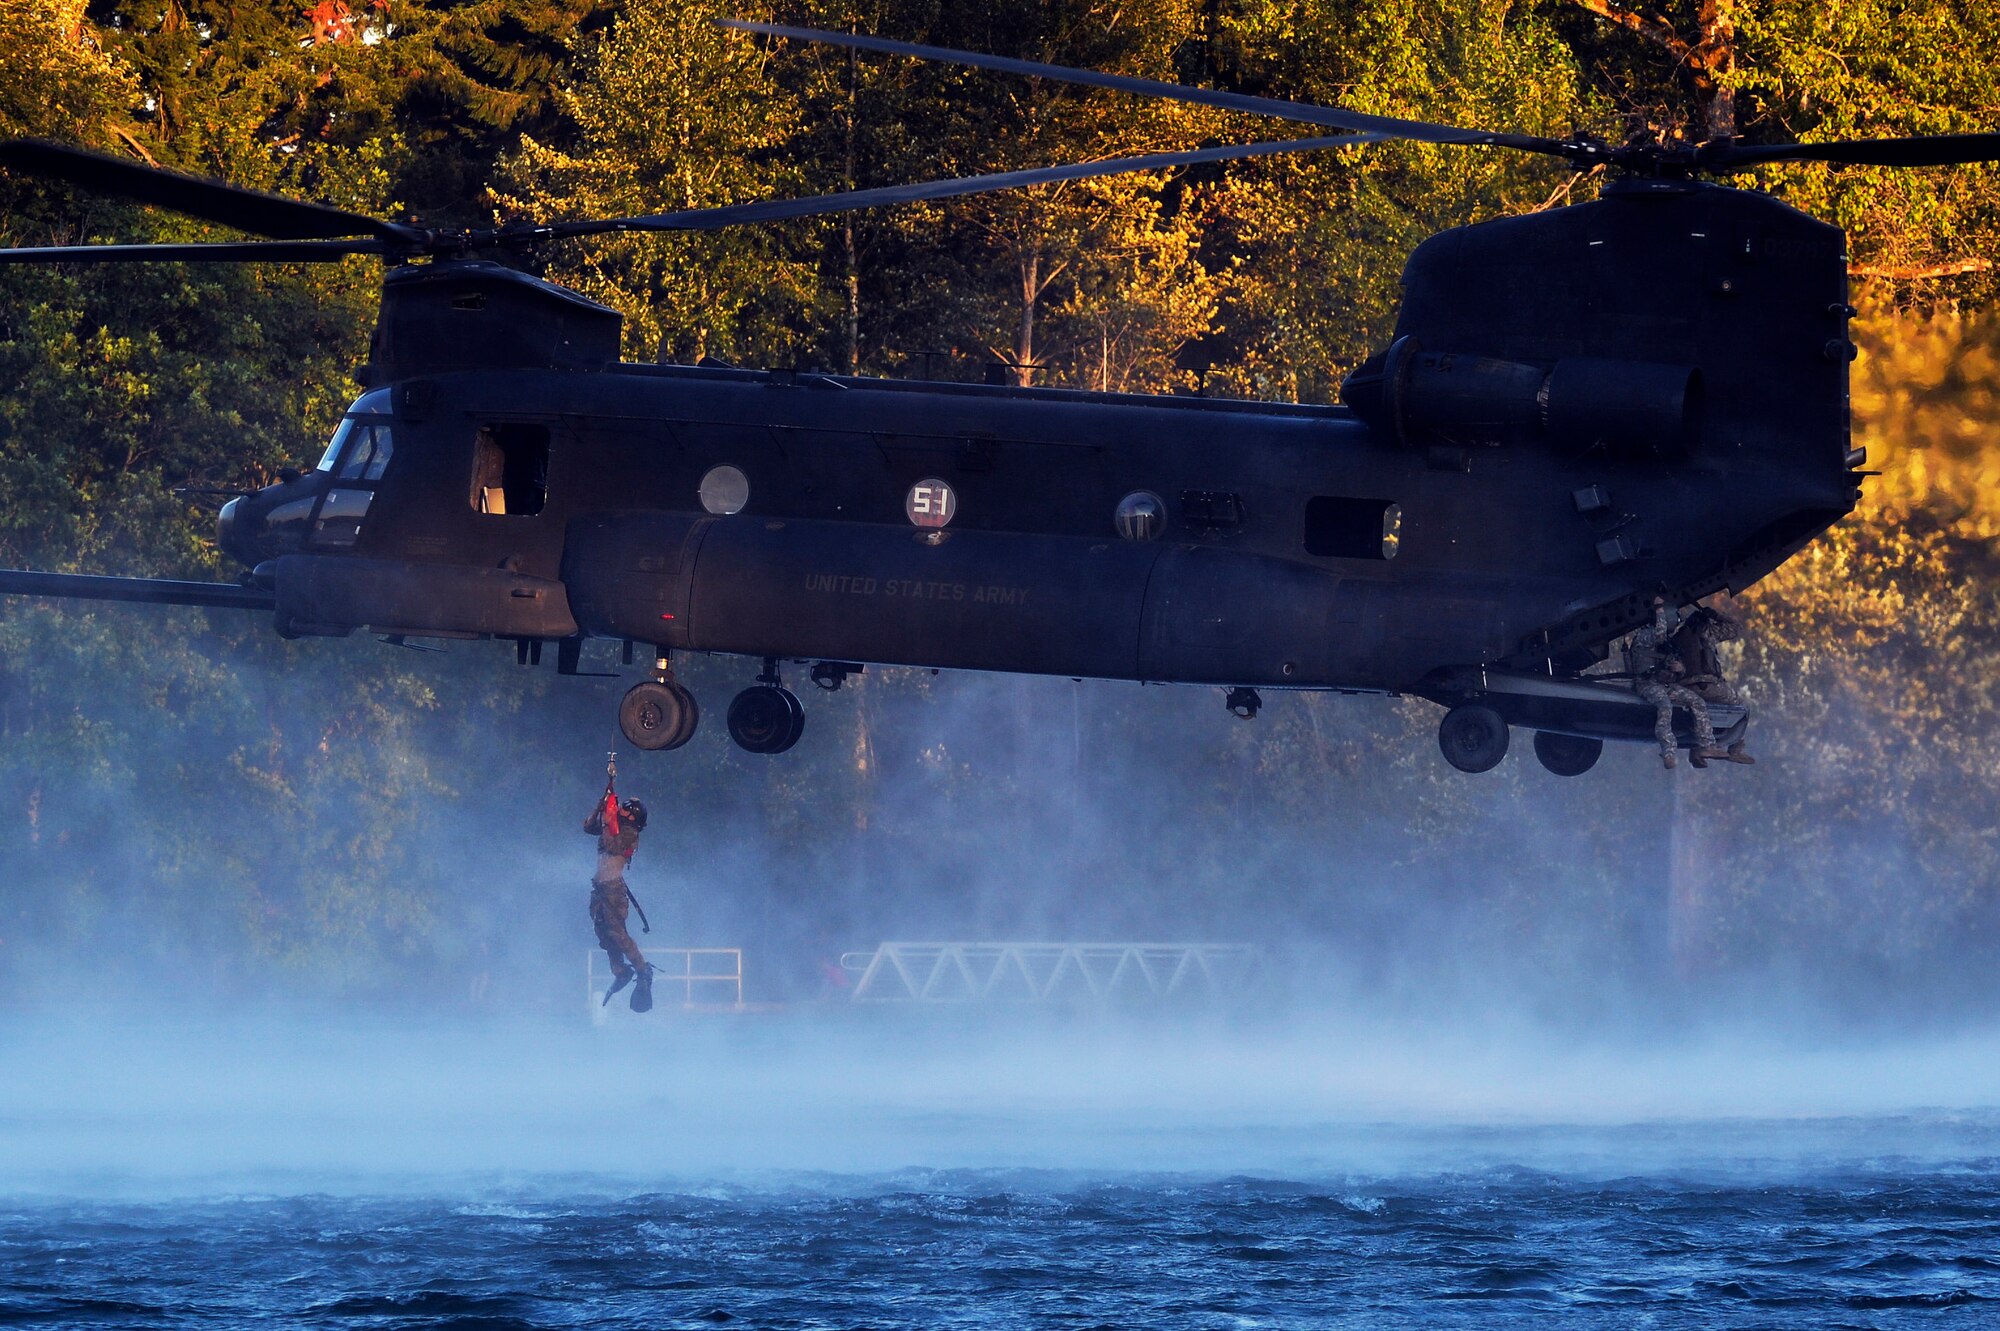 An Airman from the 22nd Special Tactics Squadron’s Red Team is hoisted up to an MH-47 Chinook helicopter July 14, 2014, during helocast alternate insertion and extraction training with Soldiers from the 160th Special Operations Aviation Regiment at American Lake on Joint Base Lewis-McChord, Wash. The 22nd STS Airmen took part in joint operations with the 160th SOAR assisting their Soldiers in upgrade helocast and hoist training. (U.S. Air Force photo/Staff Sgt.Russ Jackson)